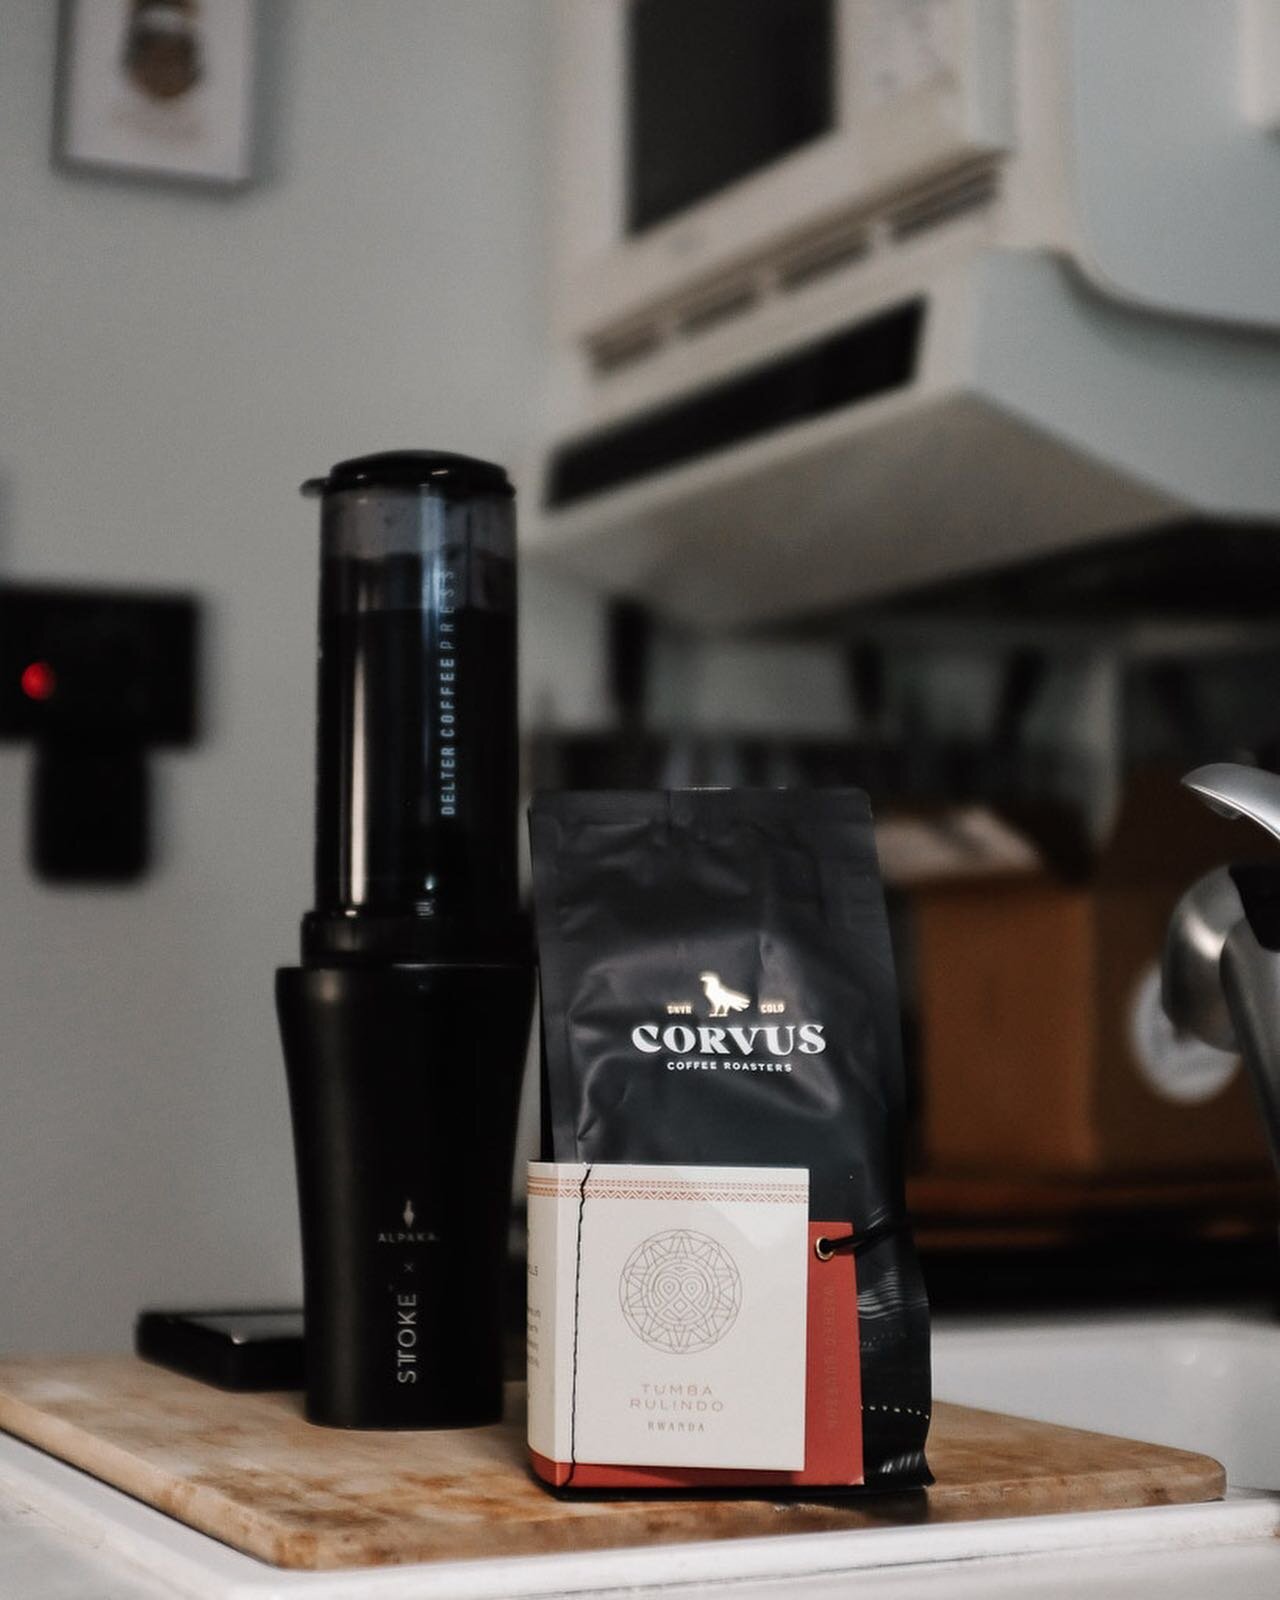 Pretty stoked for the next round of @corvuscoffee's next subscription series though Africa. I've always had a bias toward African coffees. This Rwanda reminds of sipping on a cup of black tea with hints of licorice.⁠
⁠
I think I've got my Delter Pres